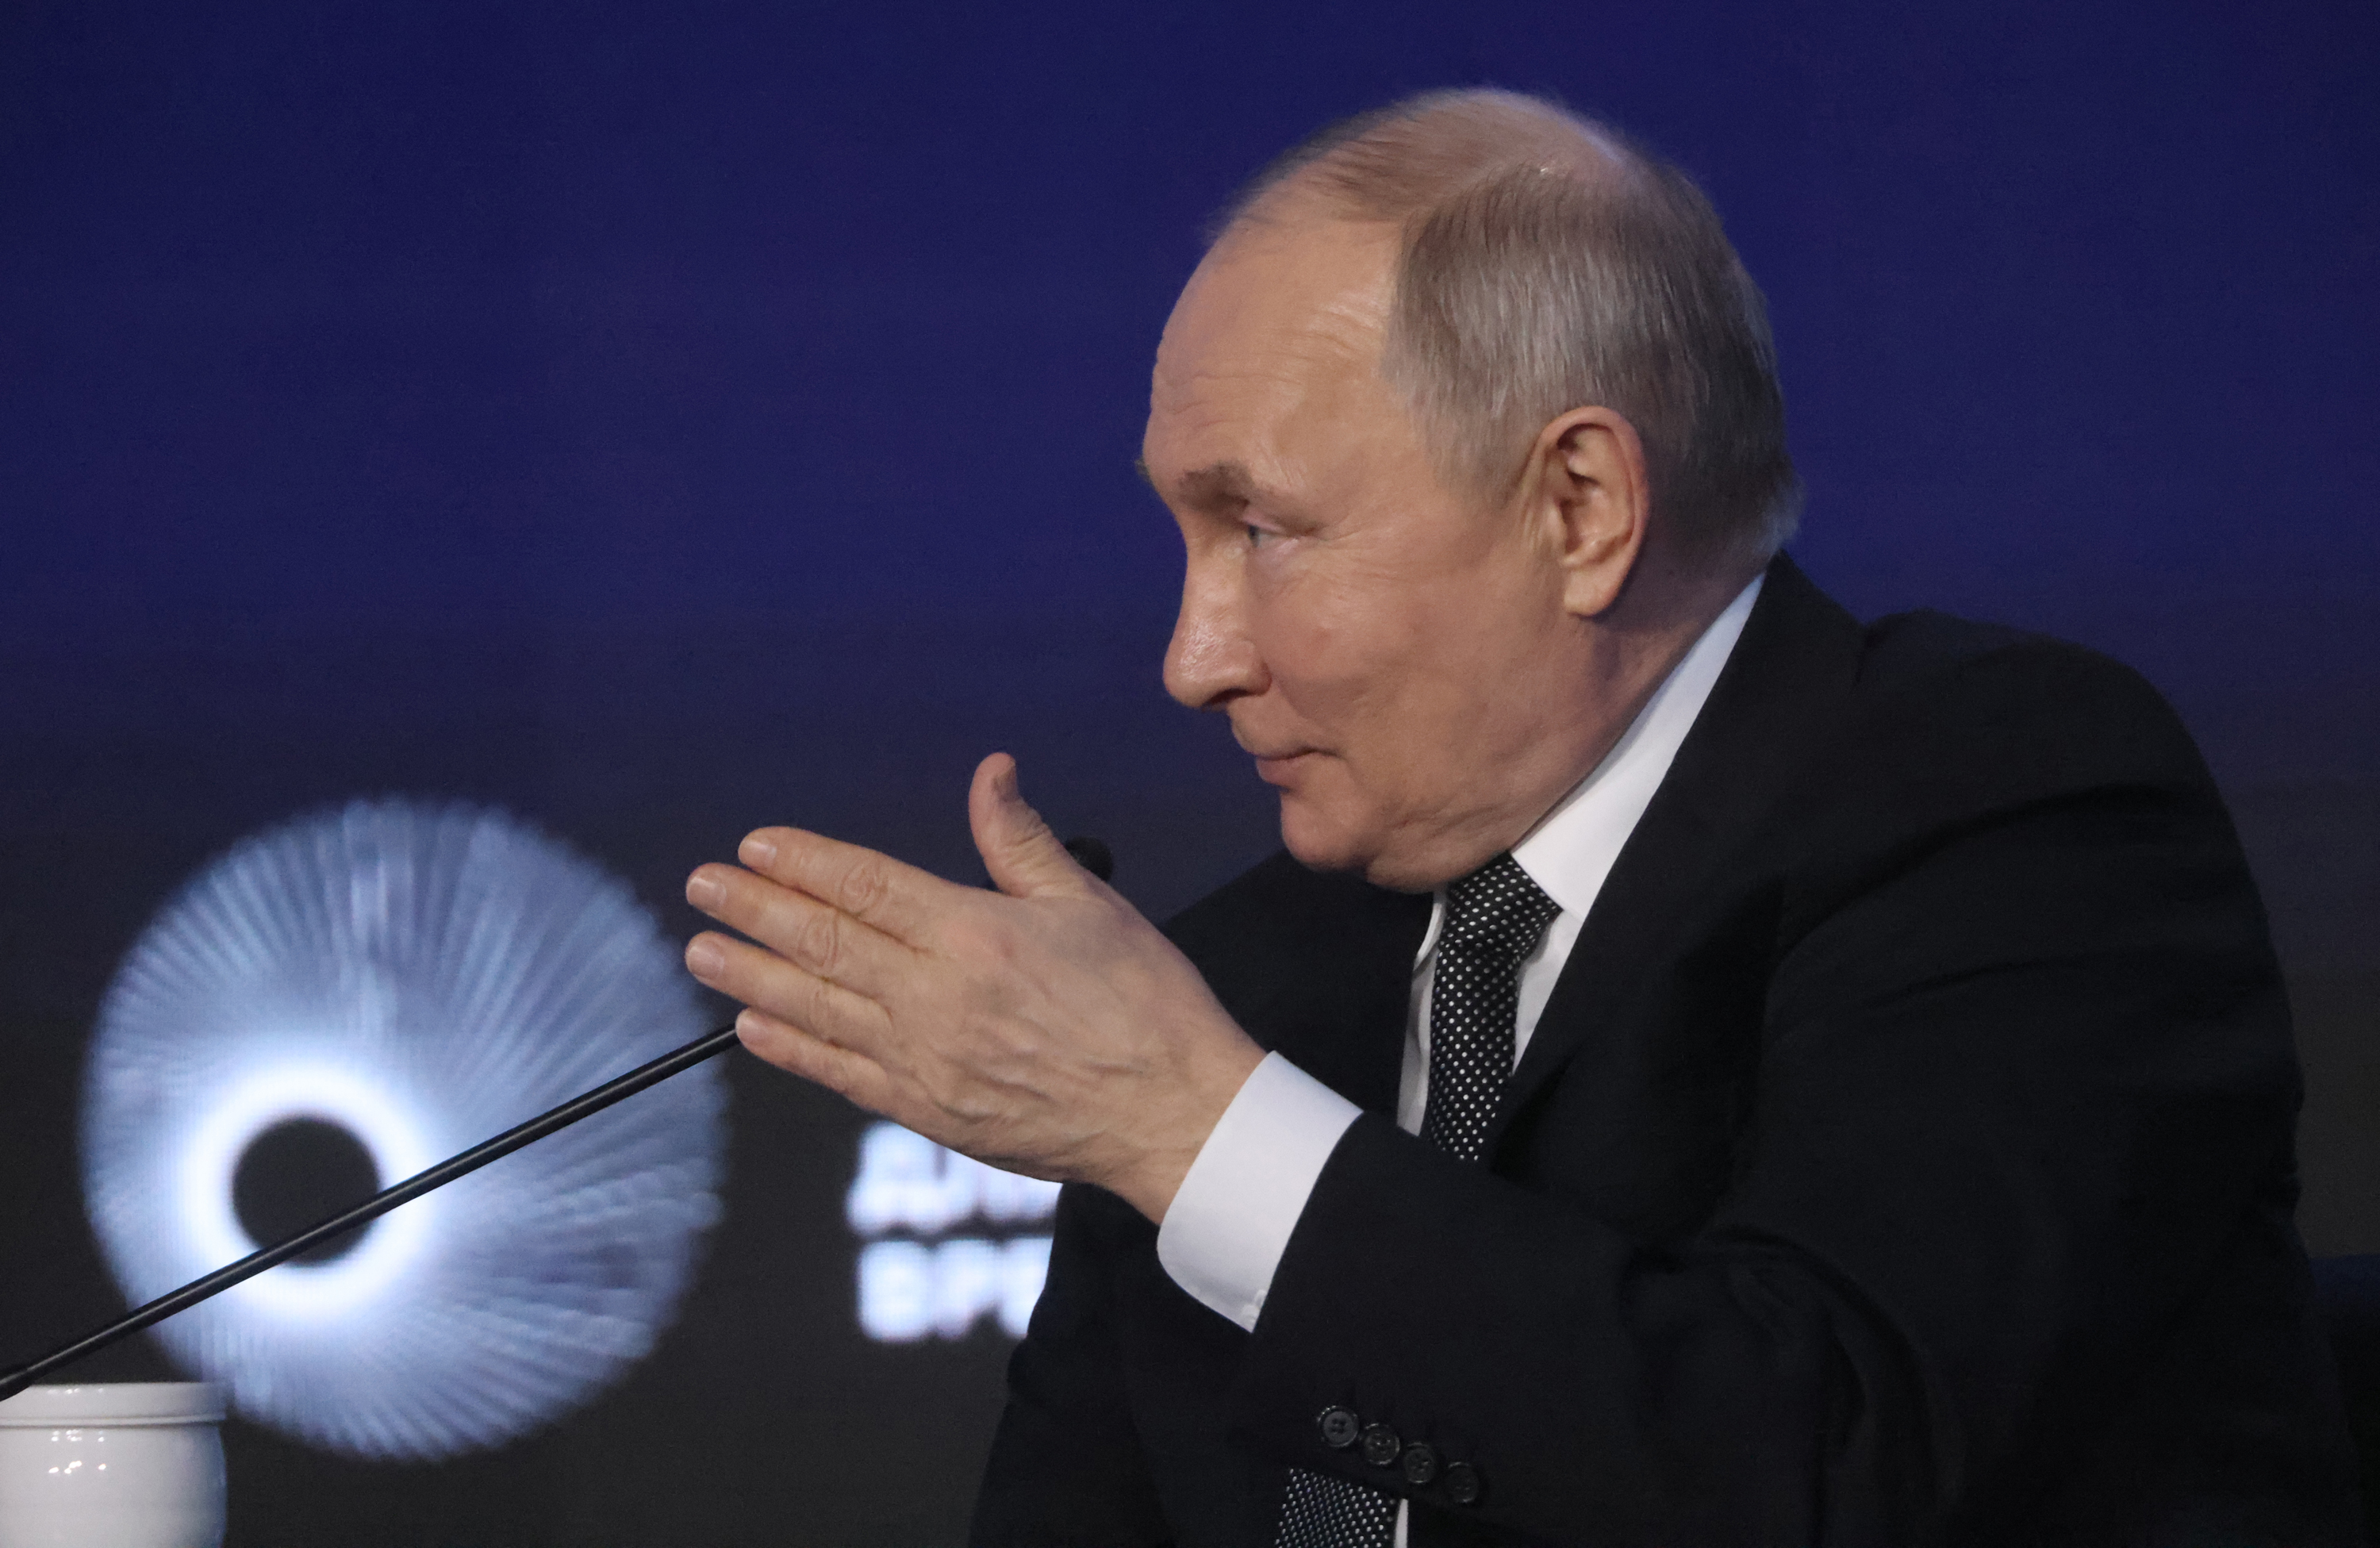 Russian President Vladimir Putin talks during the Strong Ideas For The New Times Forum in Moscow, Russia on February 20.